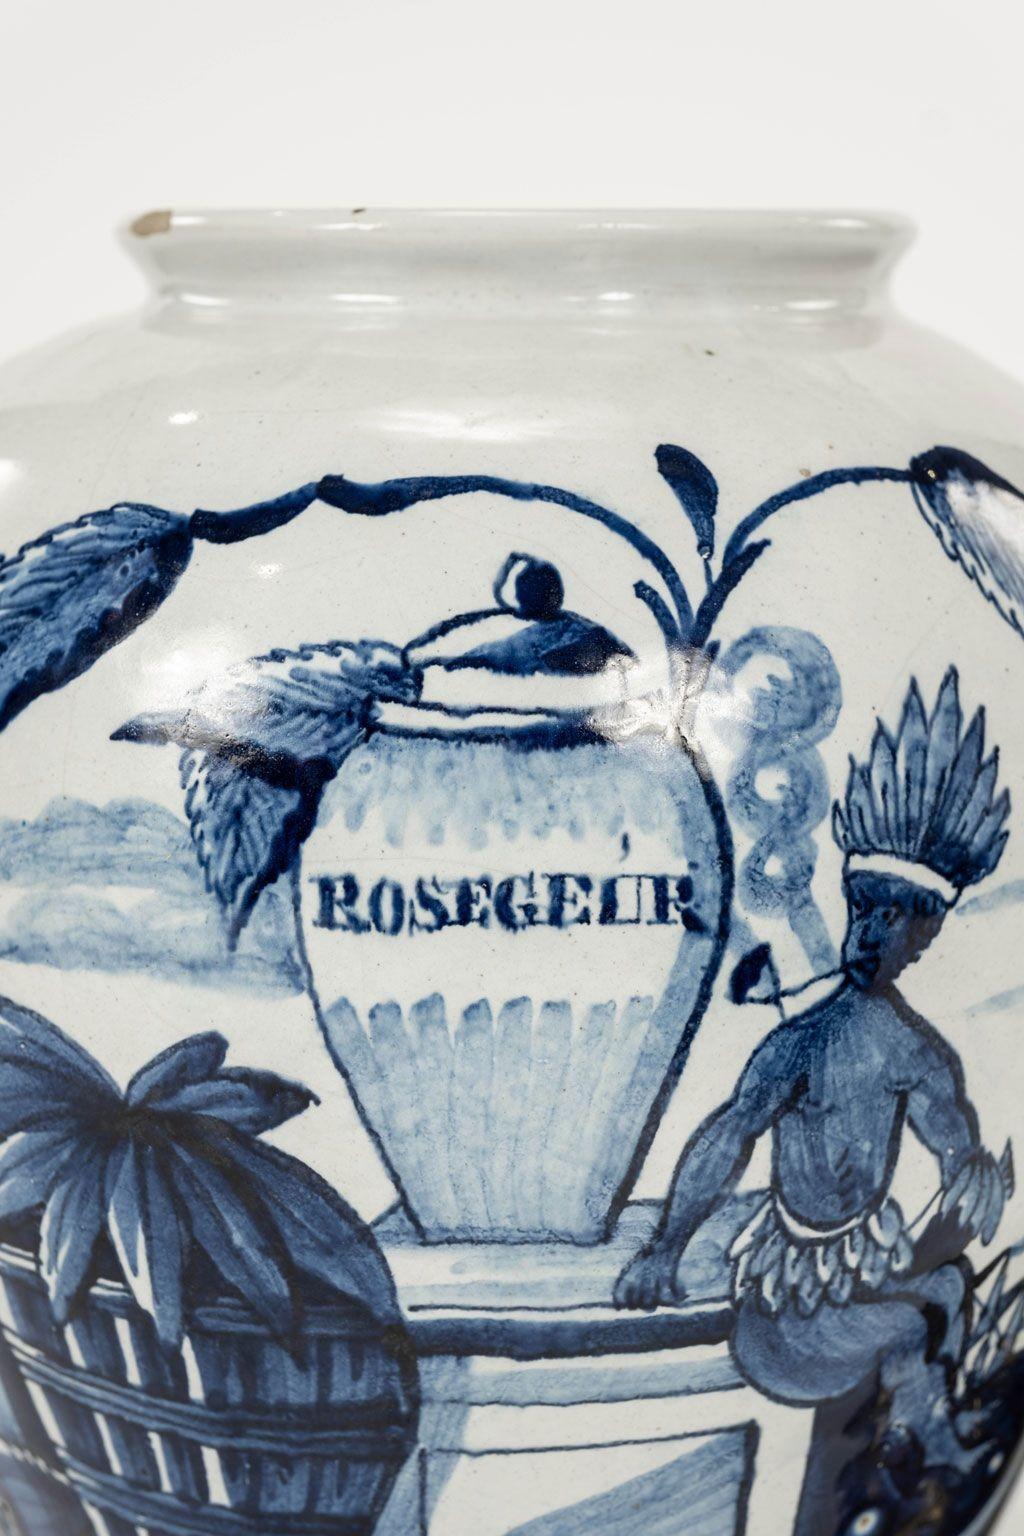 Delft Blue and White “Rosegeur” Tobacco Jar For Sale 1